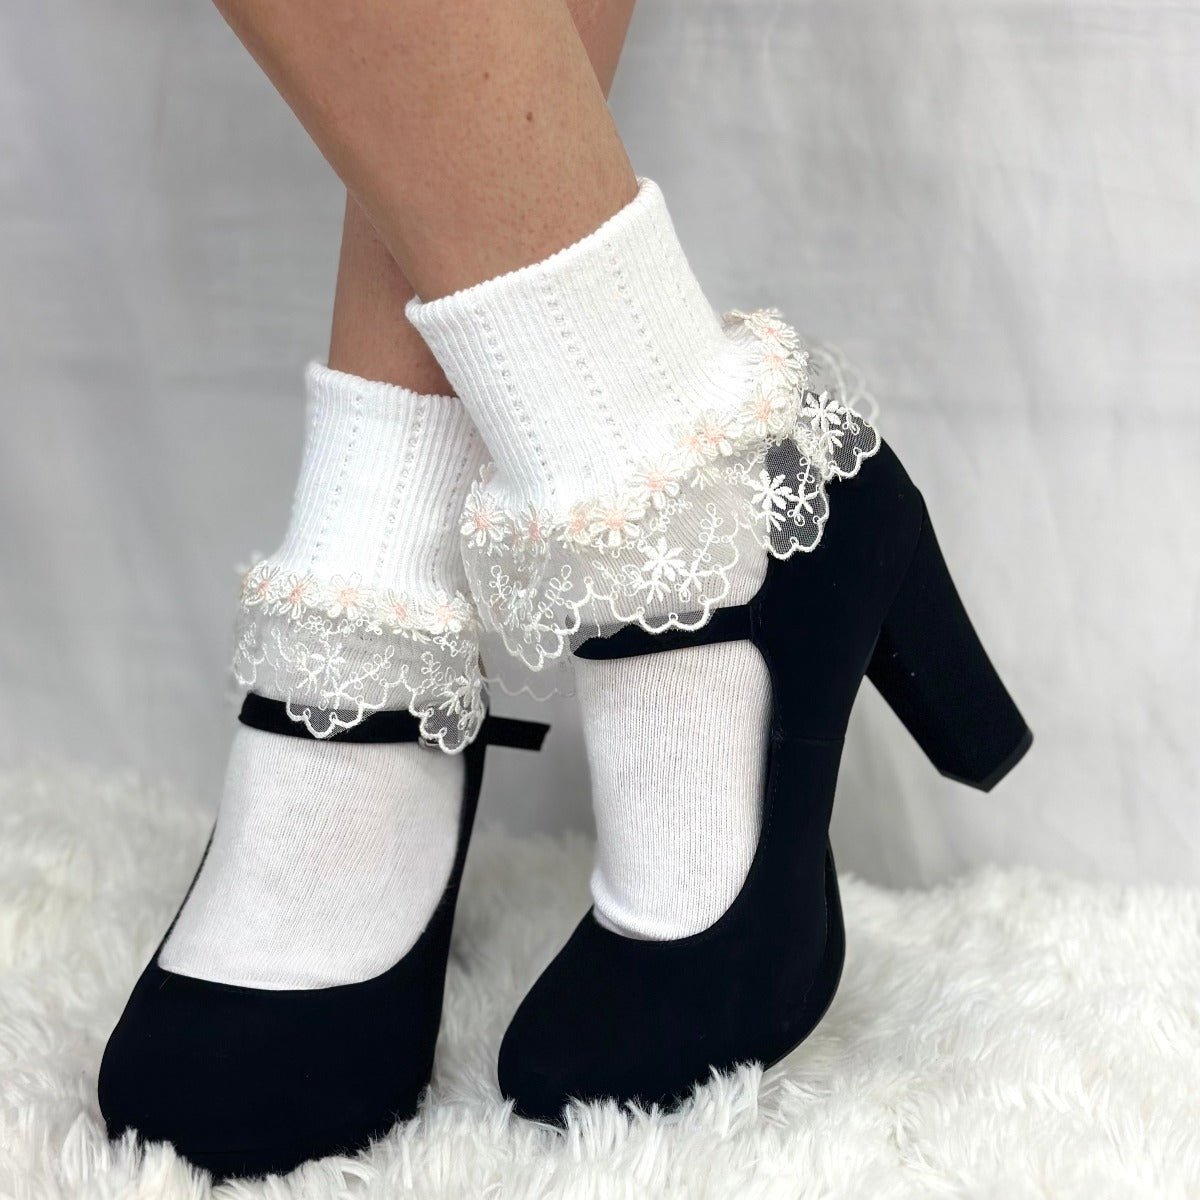 DAISY  lace cuff socks - white pink, cute lace sock for heels, fashion lace trimmed socks ladies